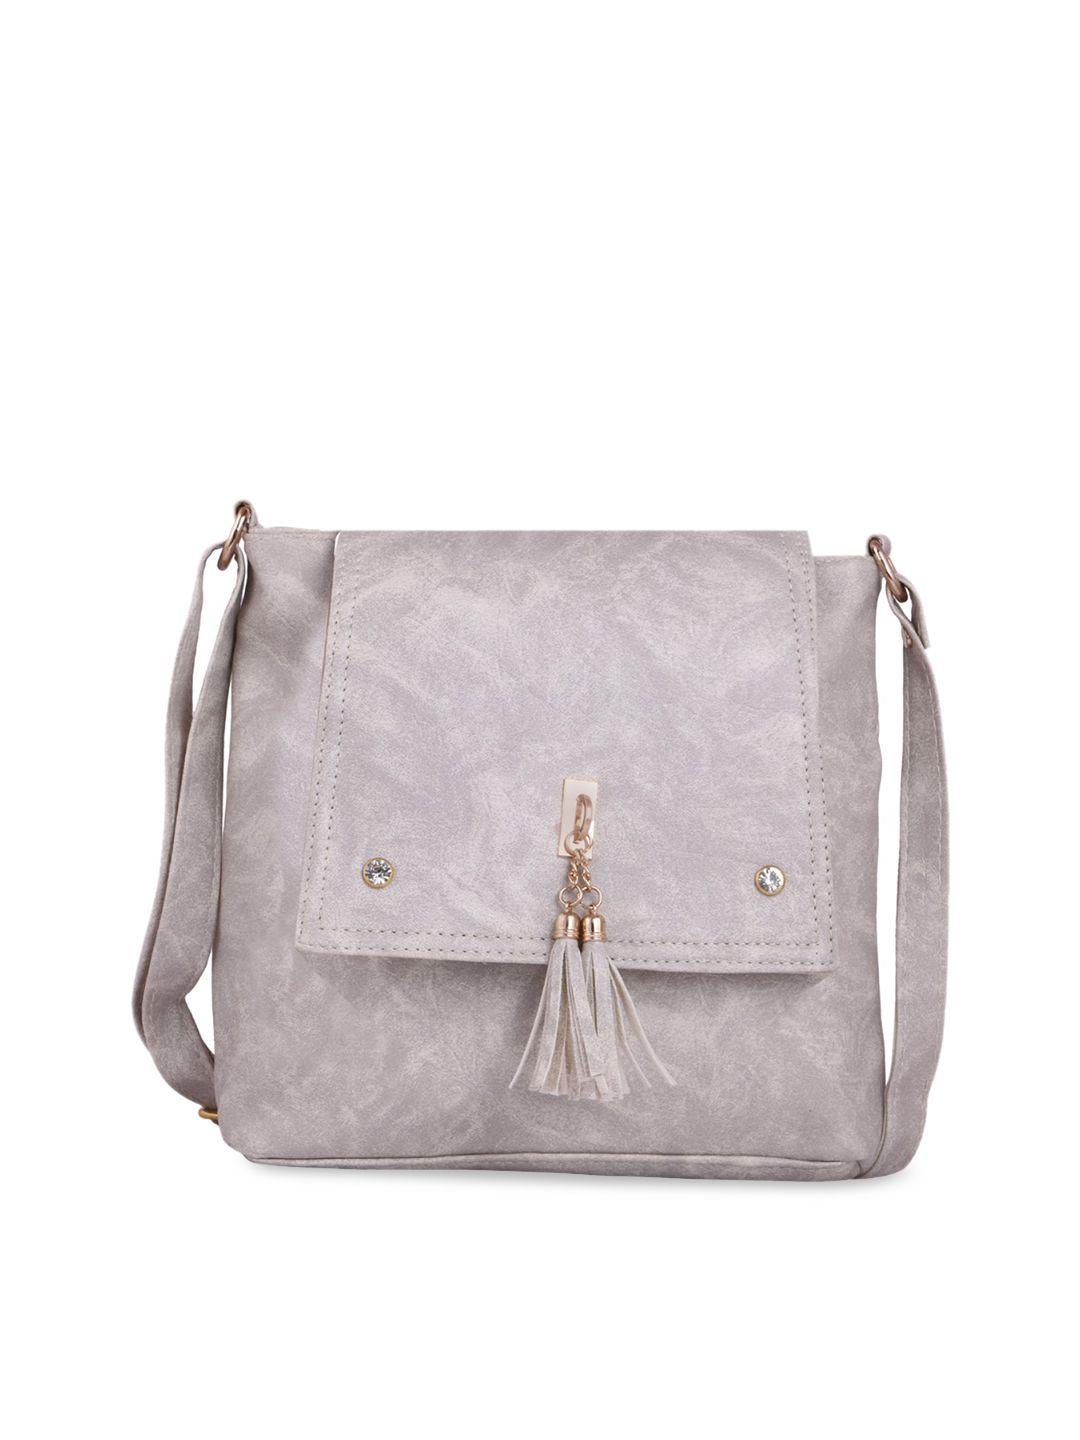 leather retail silver-toned pu structured sling bag with tasselled